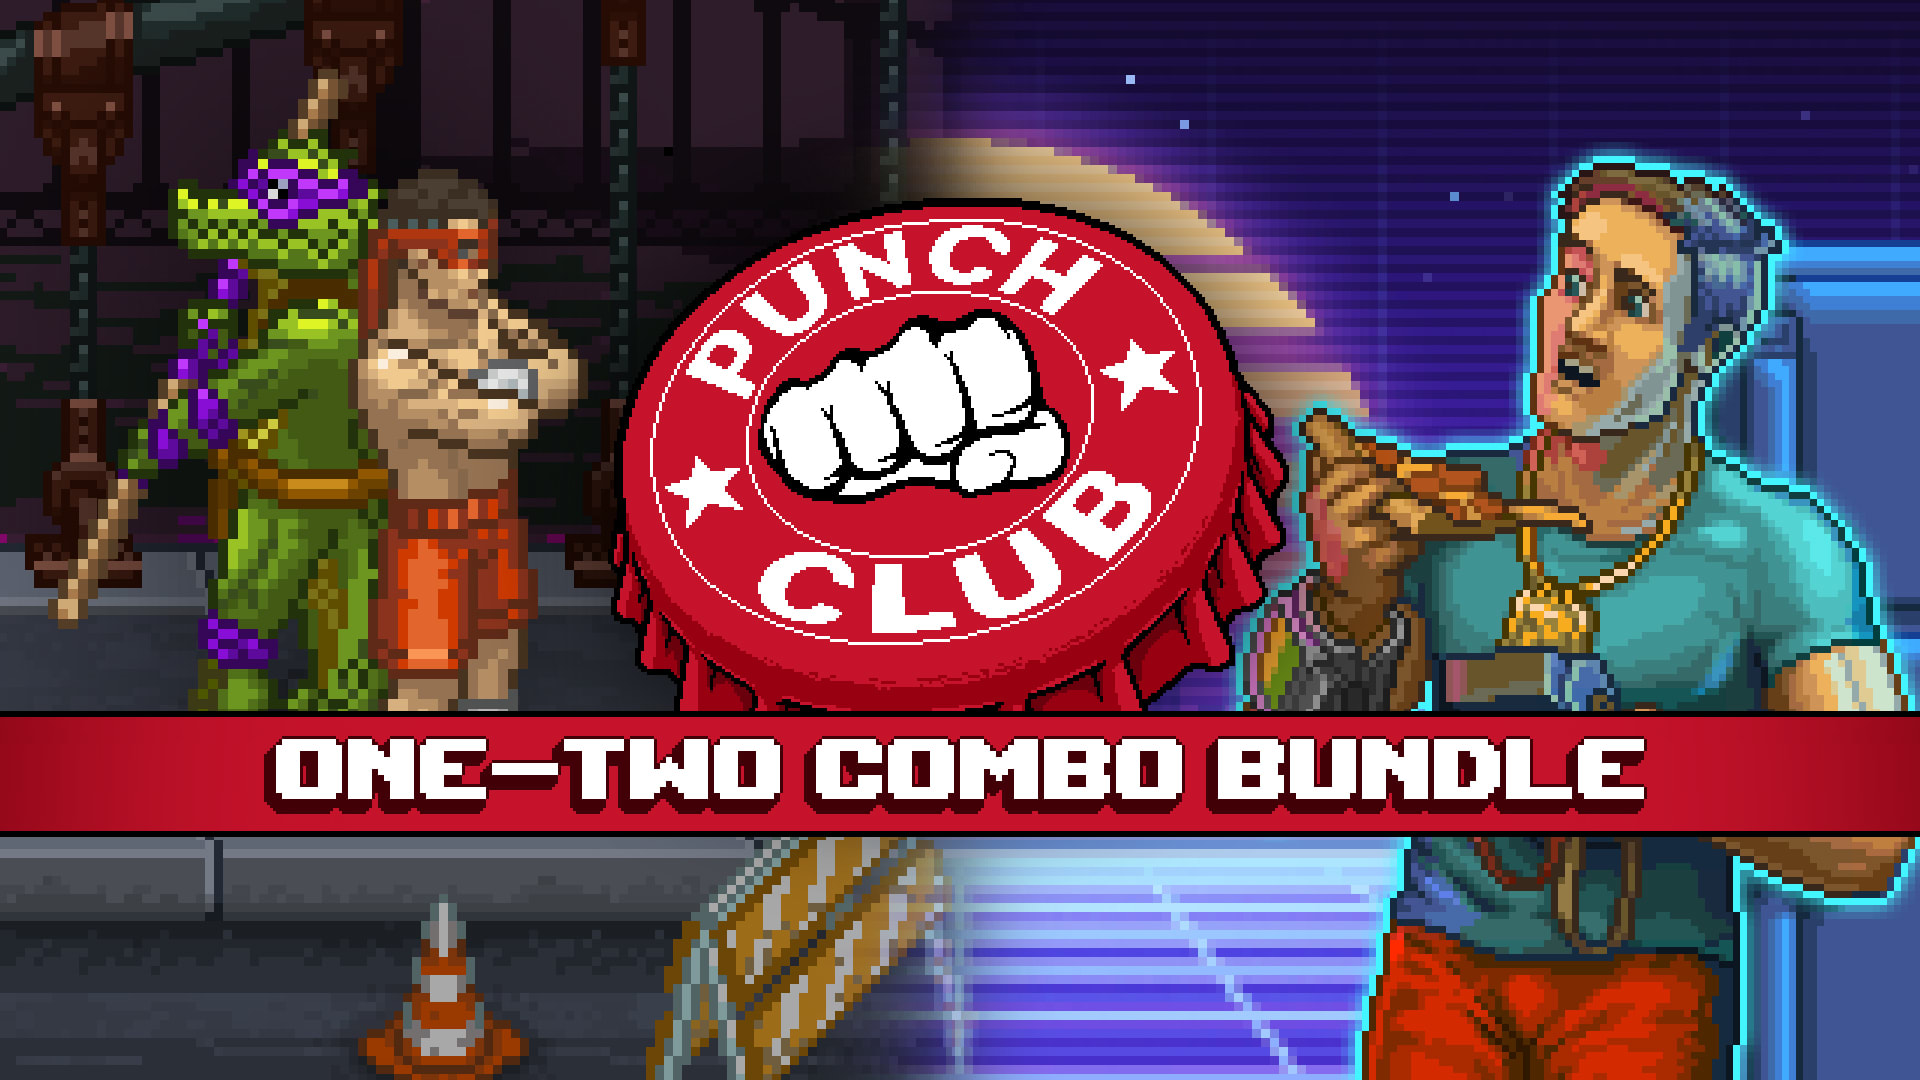 One-Two Combo Bundle: franchise Punch Club